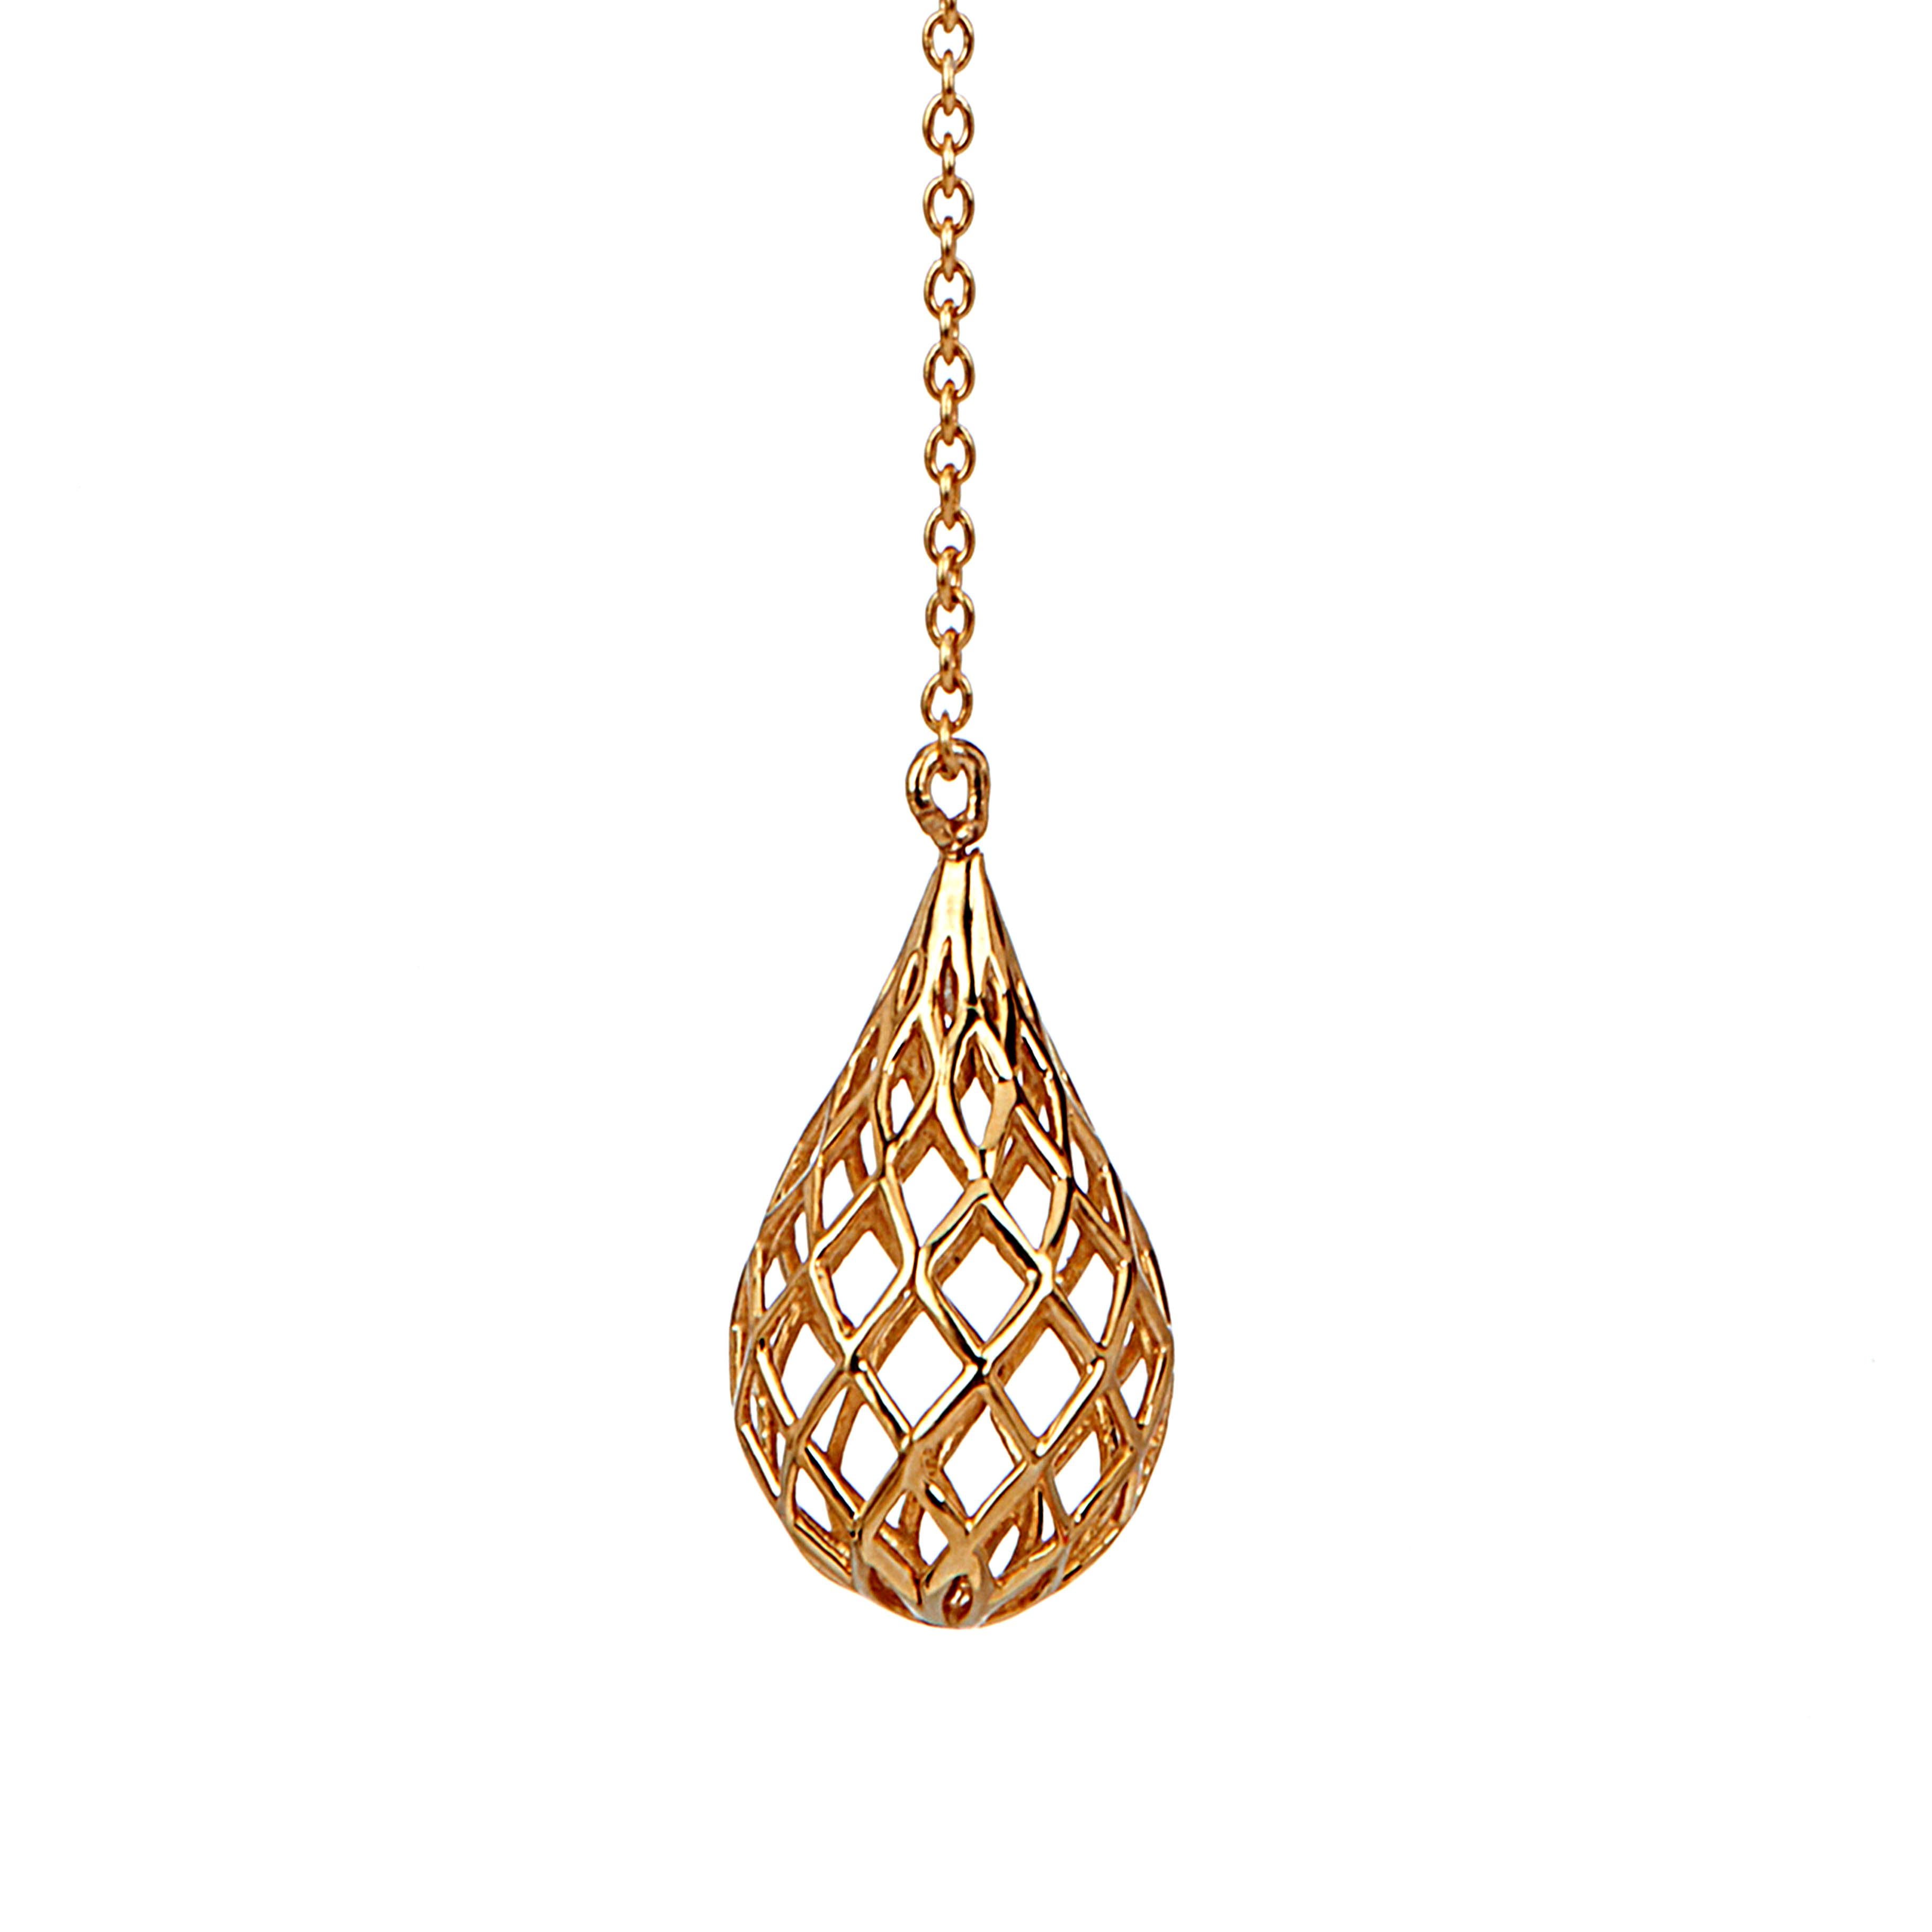 This elegant and modern drop-shaped pendant necklace will make you look more feminine. The chain-linked necklace with a pointed diamond creates a modern mood, which let you go well with any outfit.

This streamlined and elegant necklace & earring